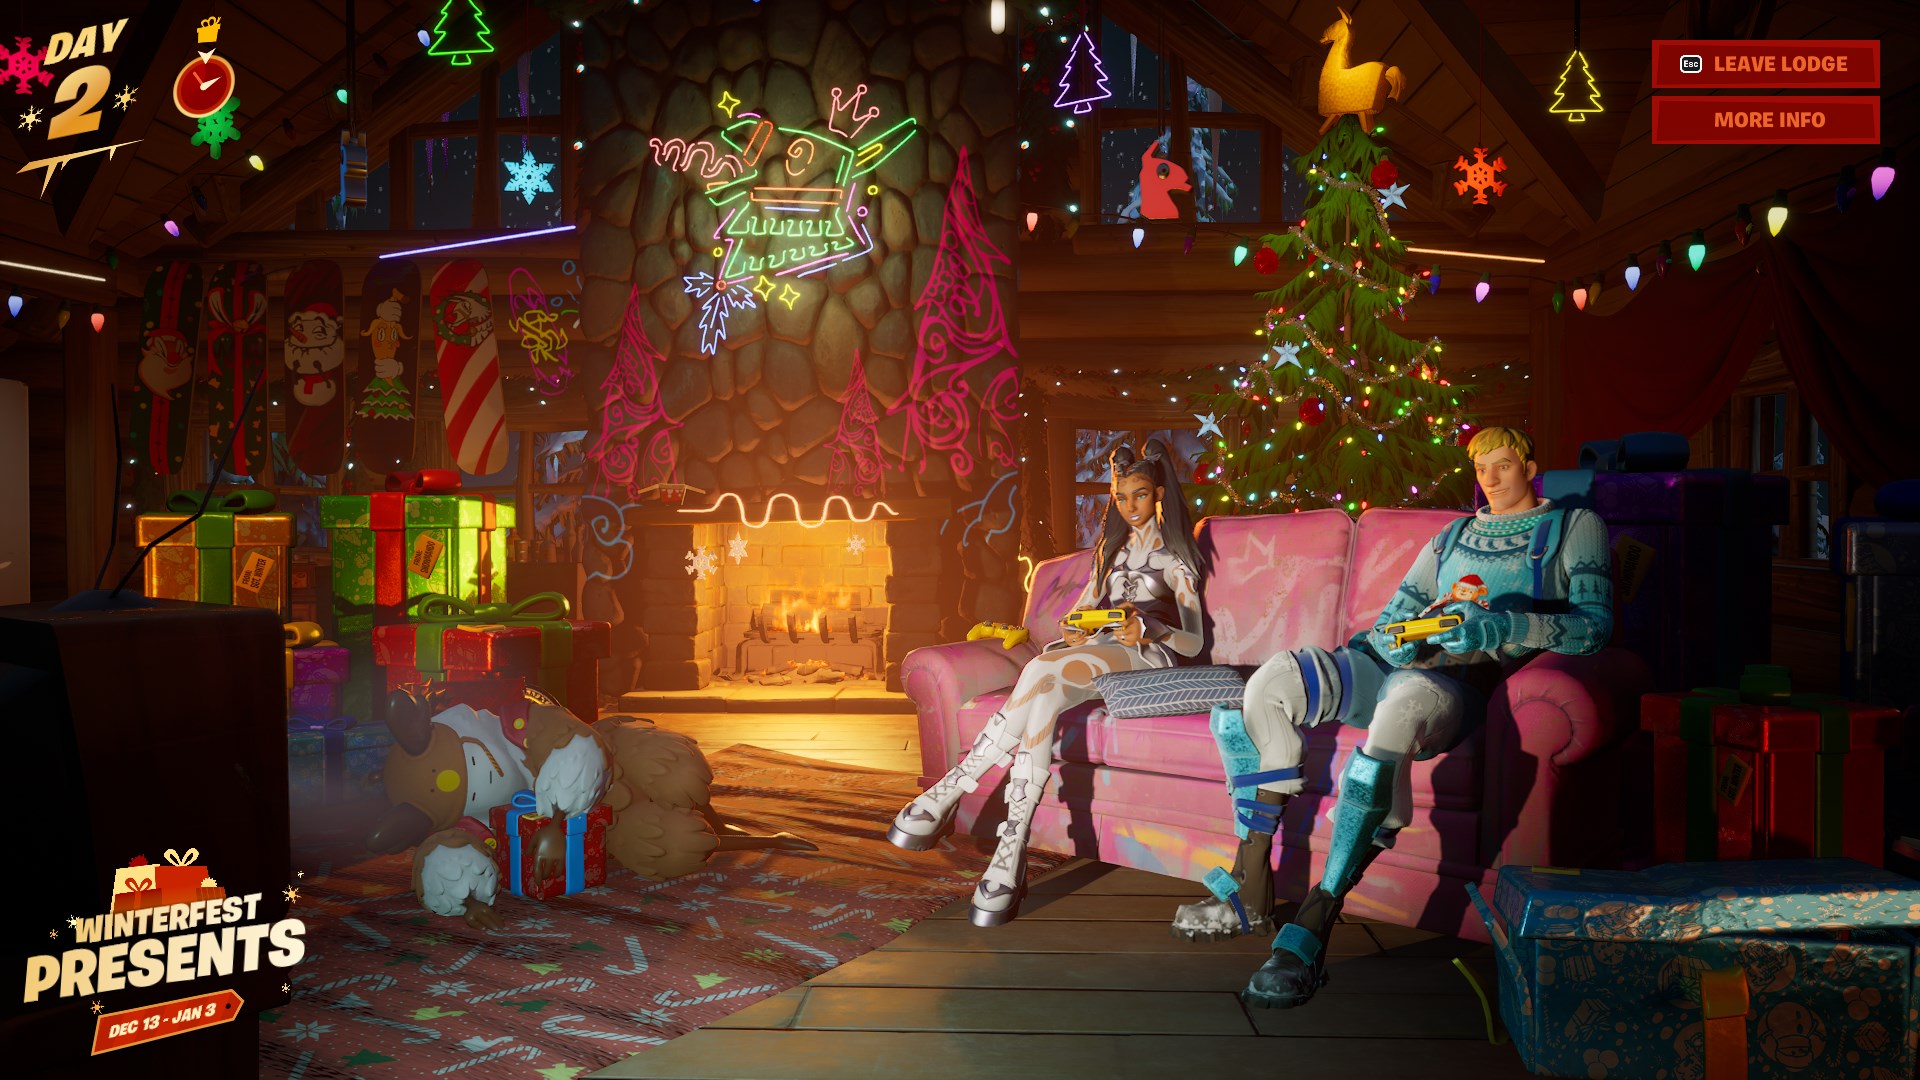 Three Fortnite characters hang in a decked-out winter holiday-themed cabin, complete with gifts and a lit fireplace